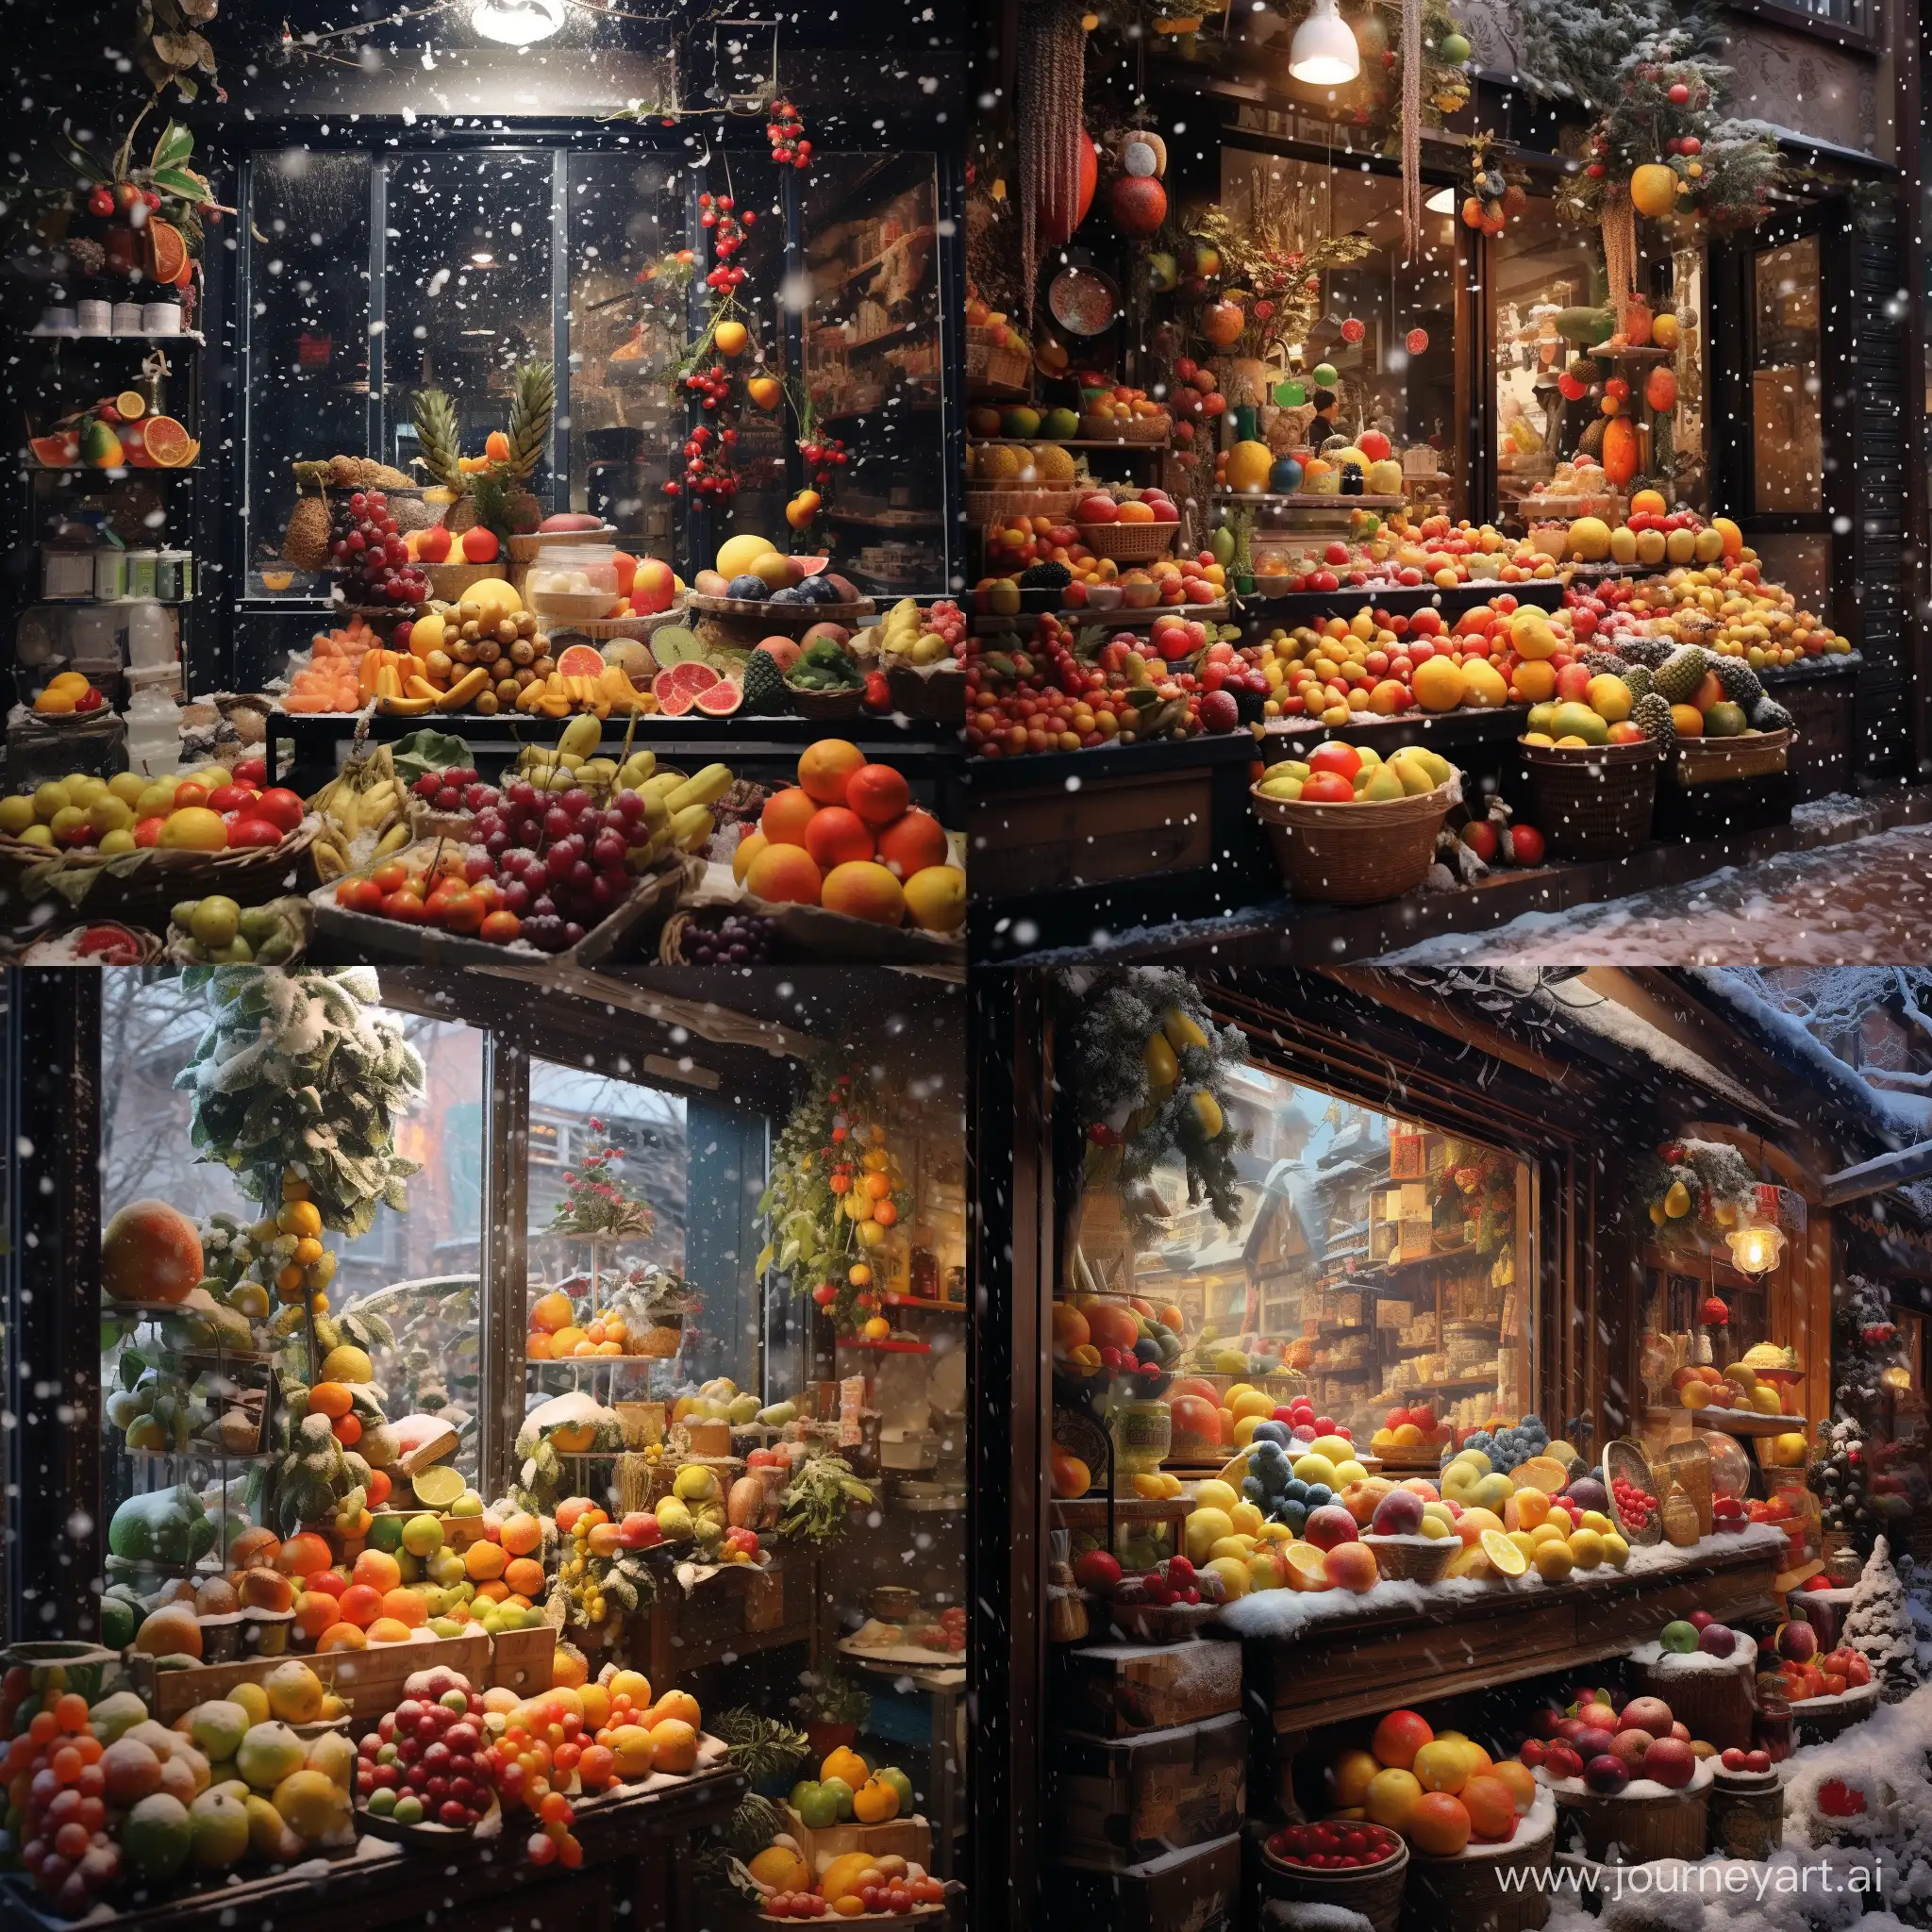 New Year's Eve is snowing with fruit inside the shop.
